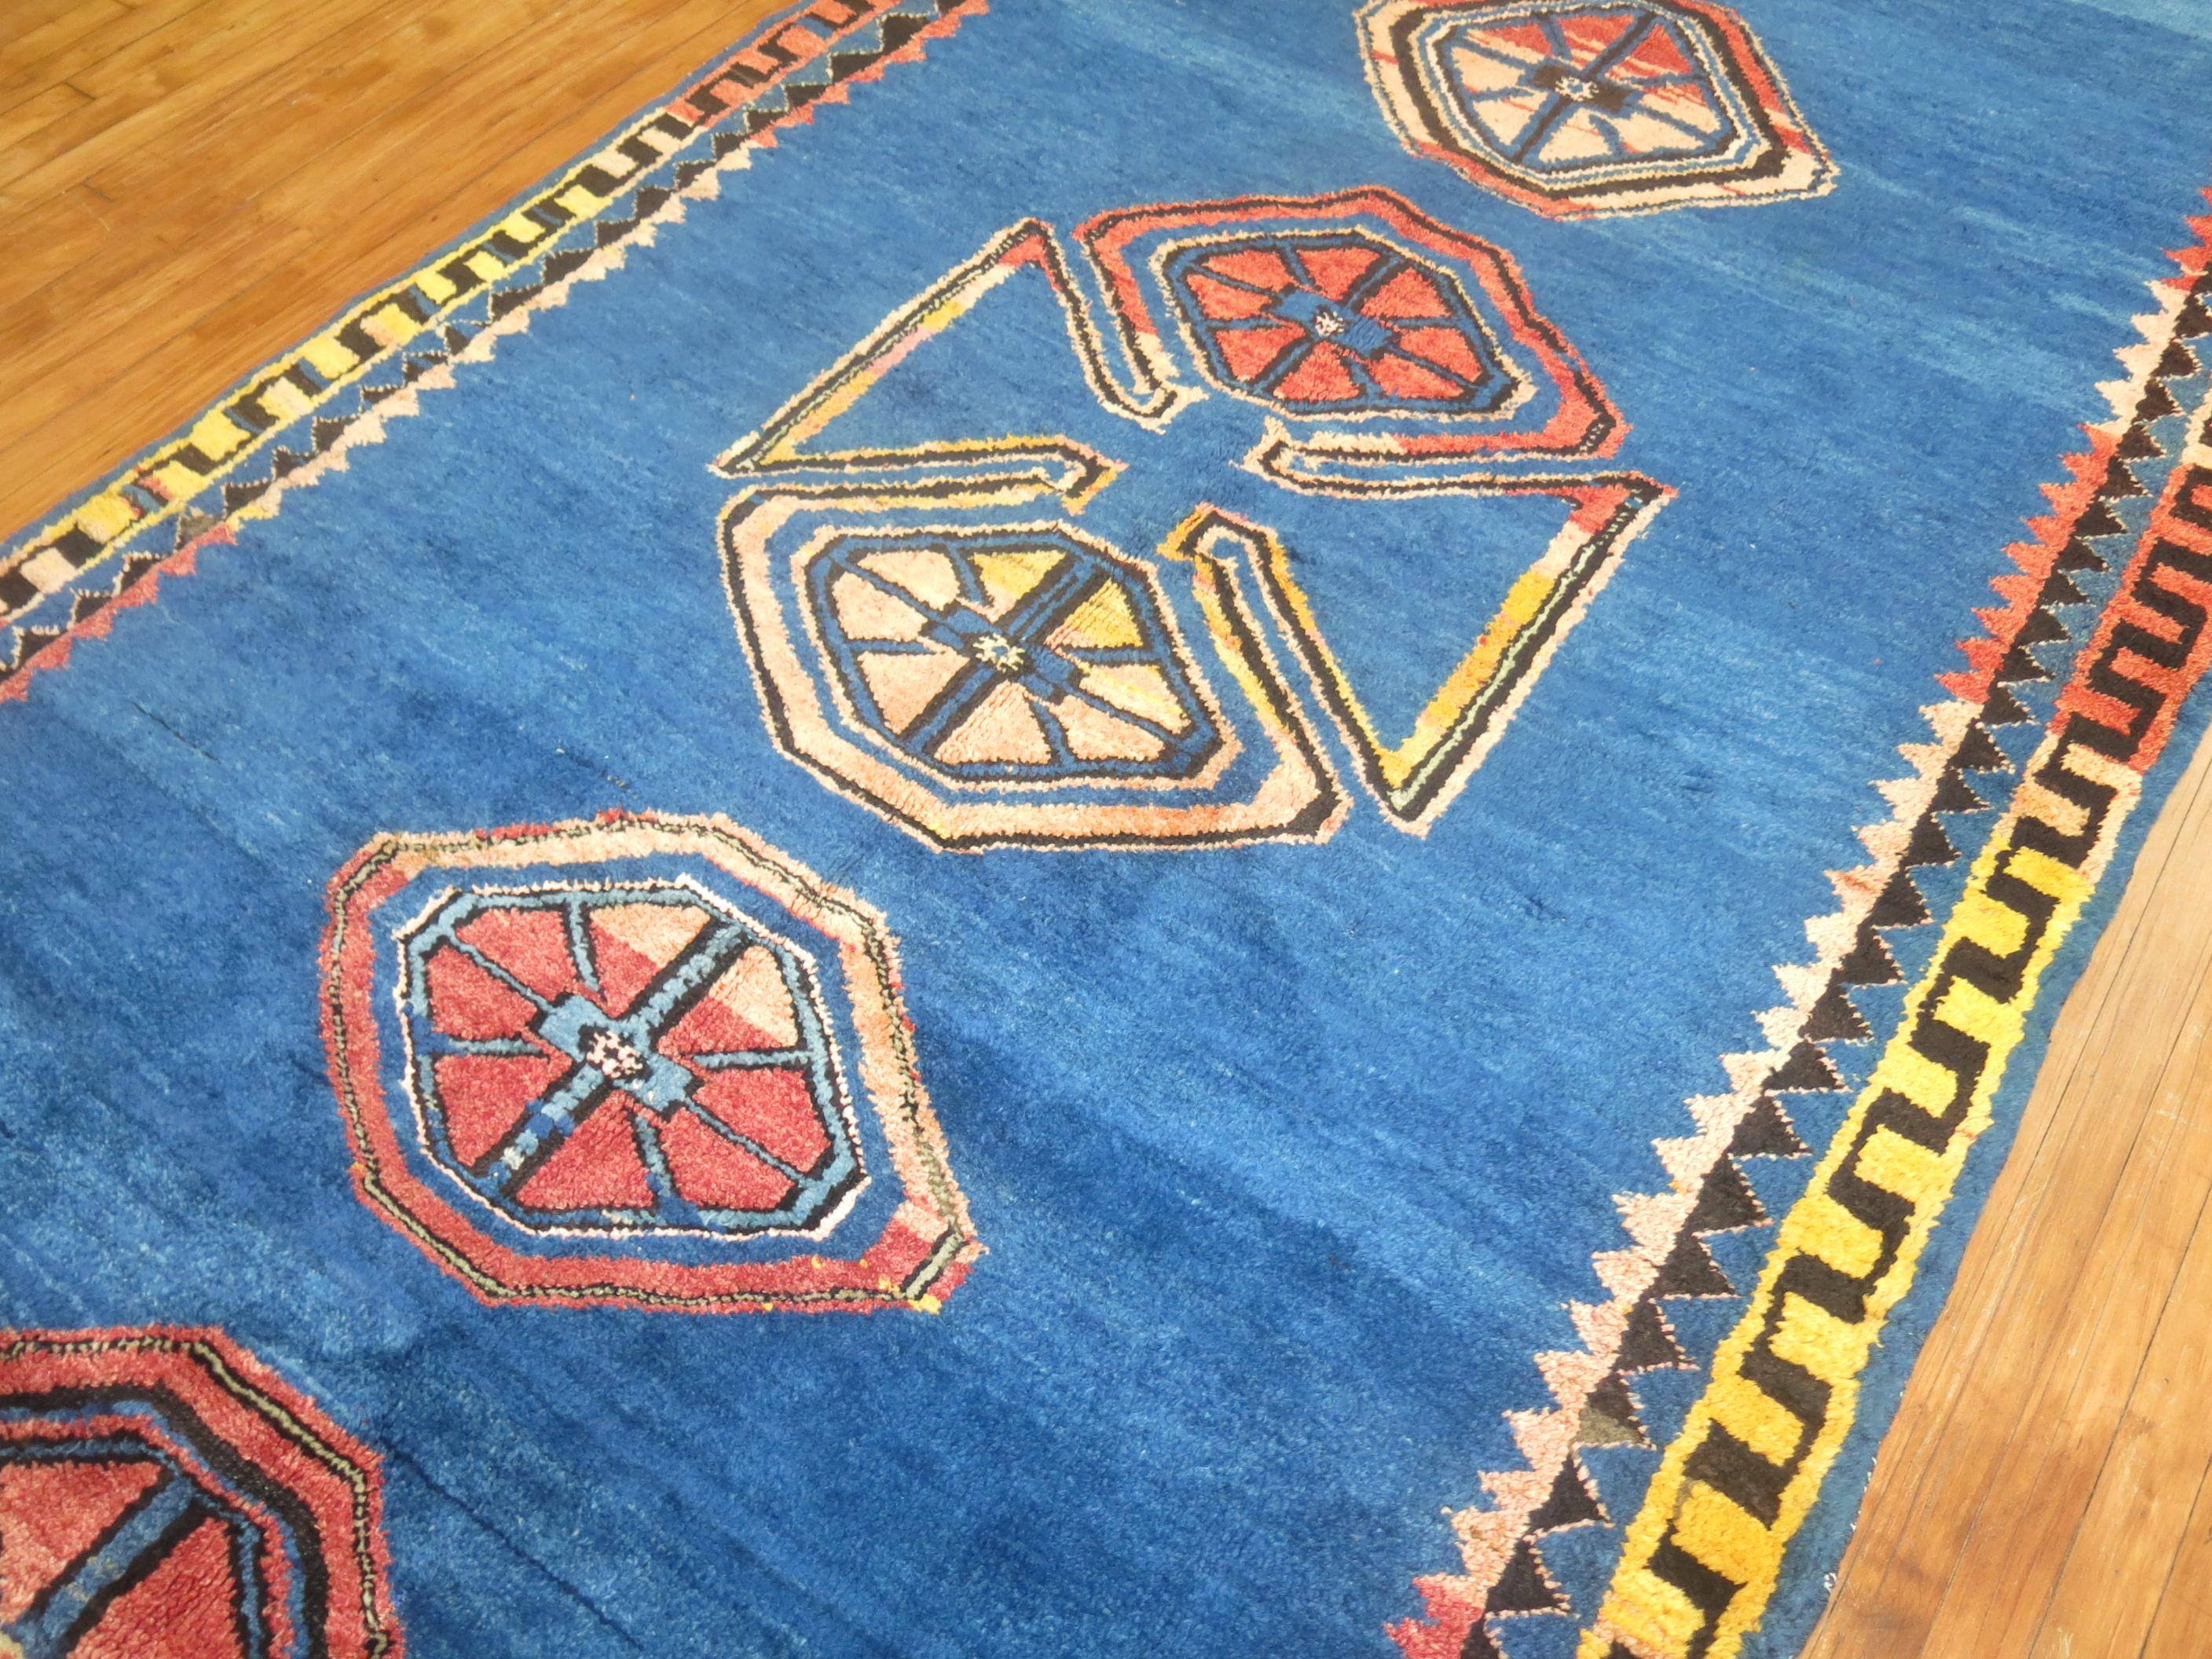 One of a kind mid-20th century handwoven Turkish rug with a folksy open palette design on a cobalt blue background. The blue abrashes found in the field( abrash are natural color variations found in some vintage and antique rugs) are common in